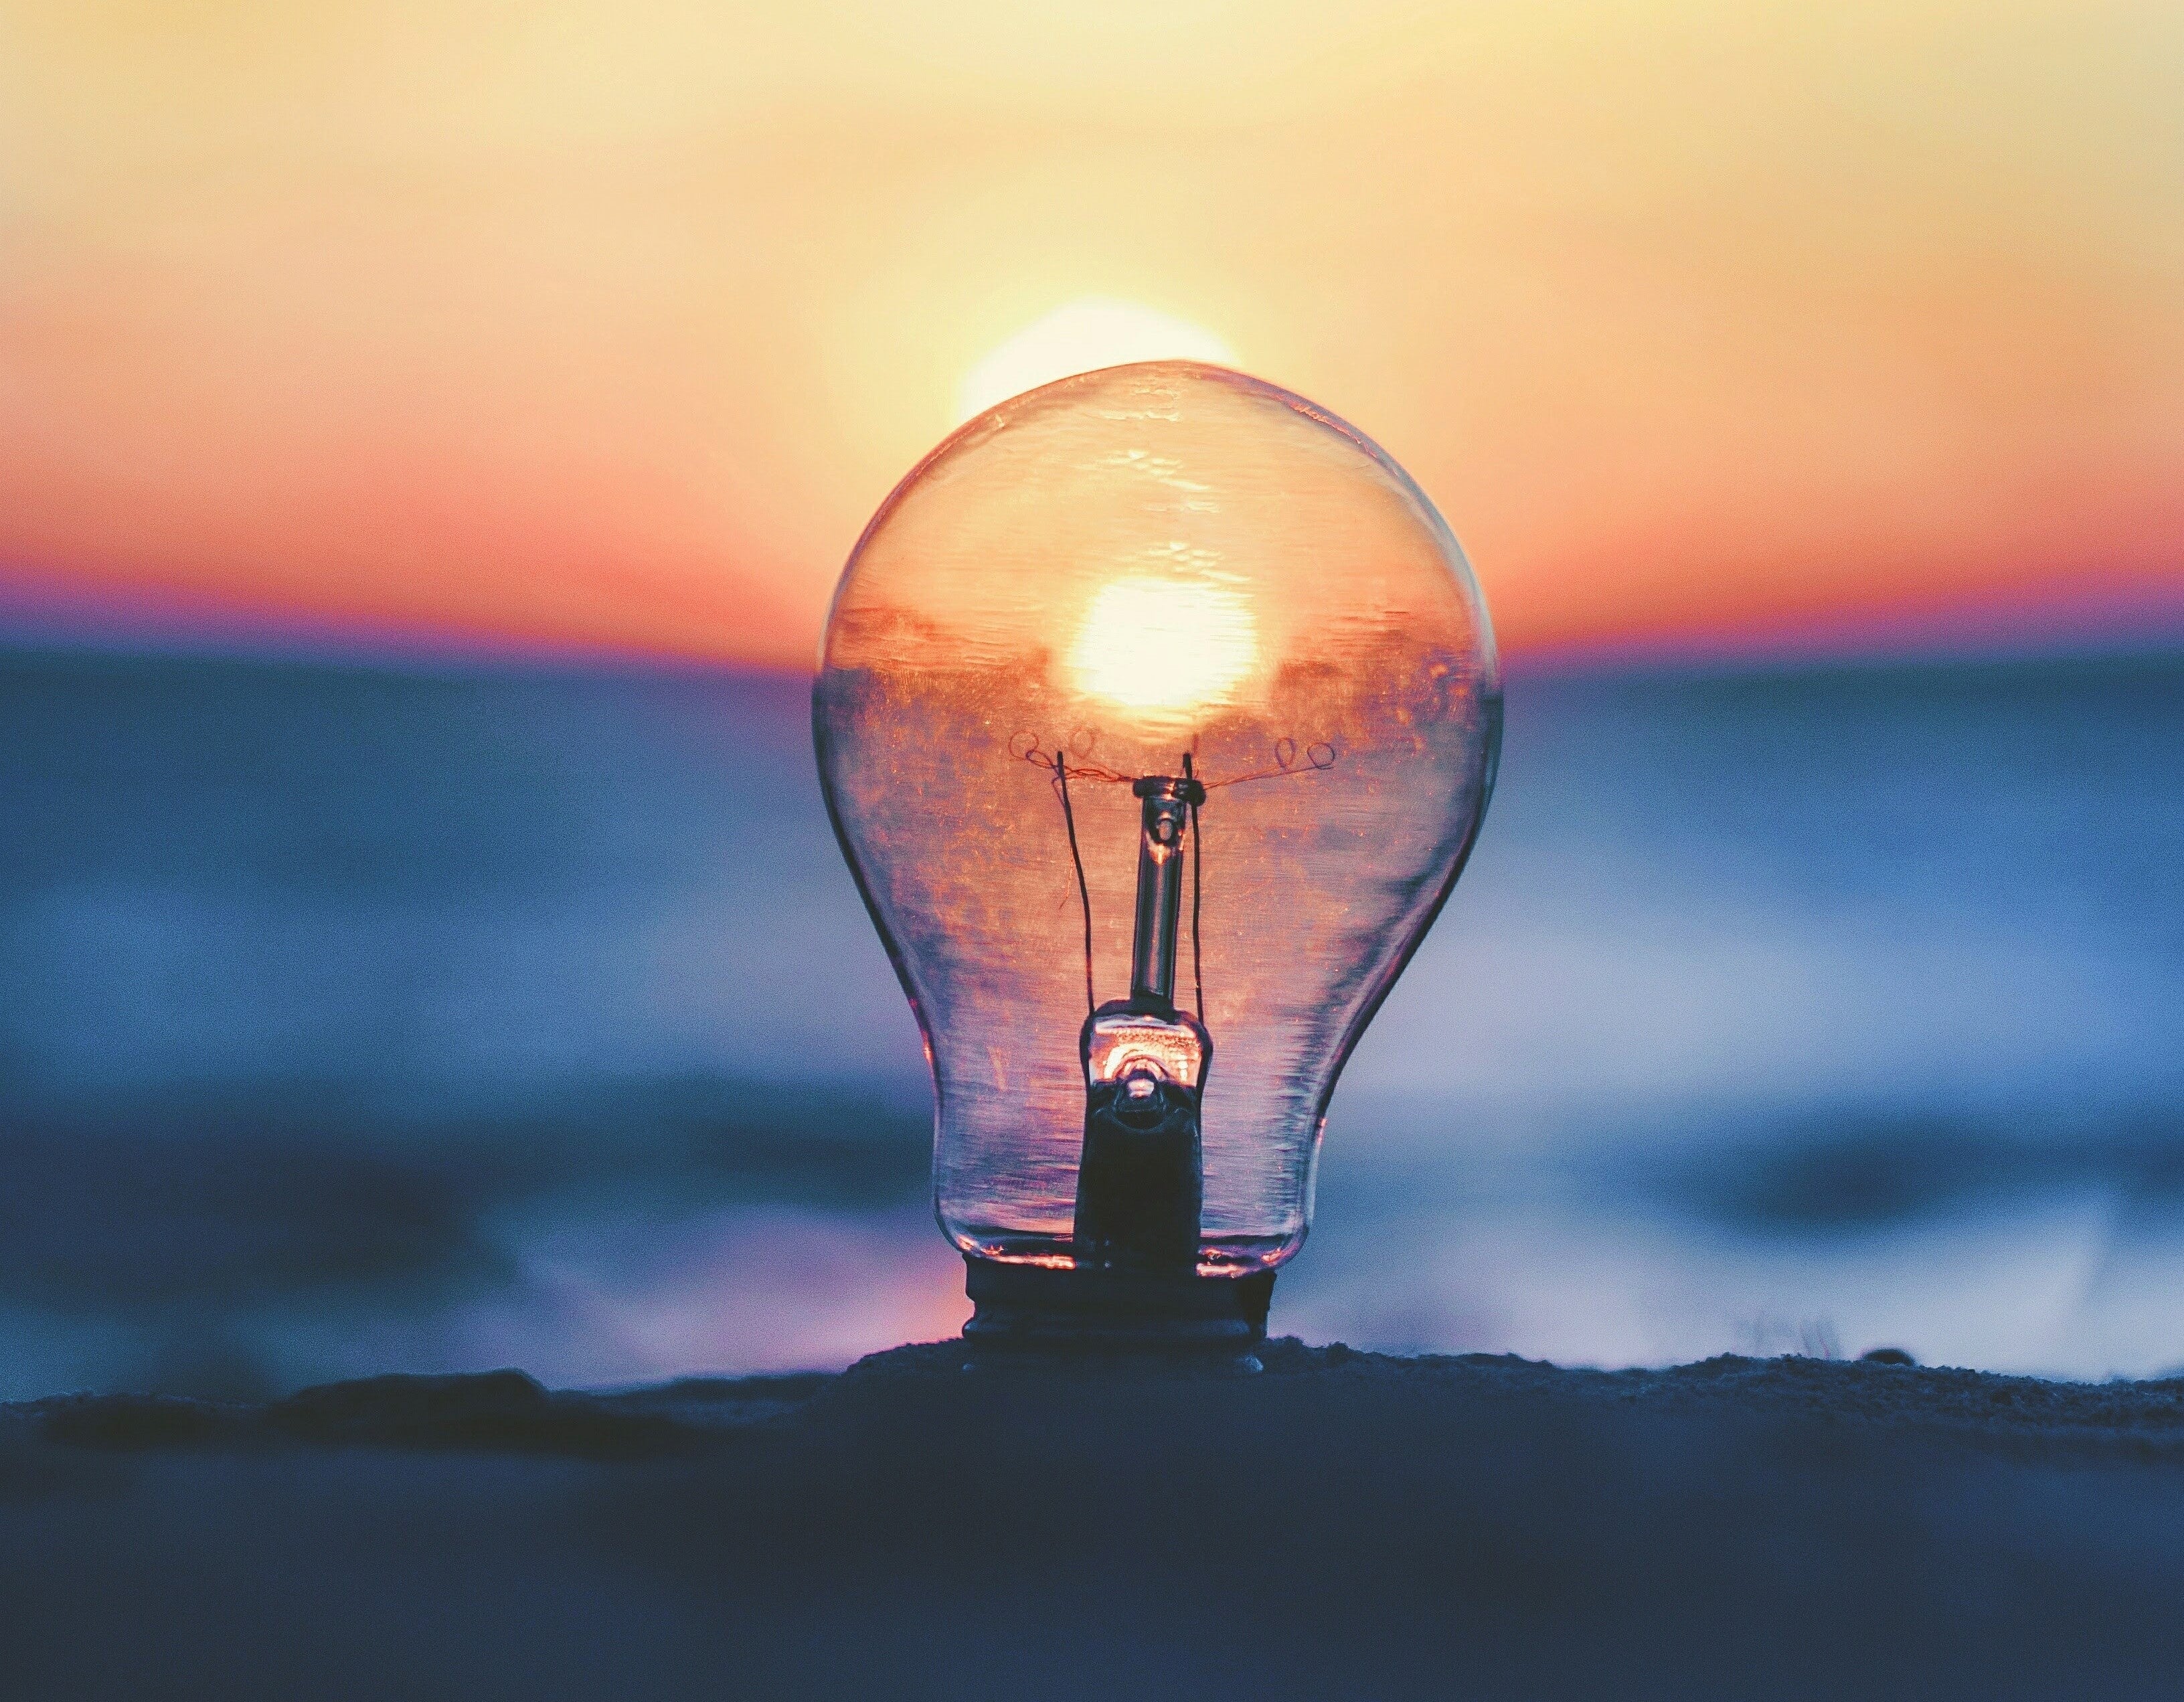 lightbulb with sunset in background